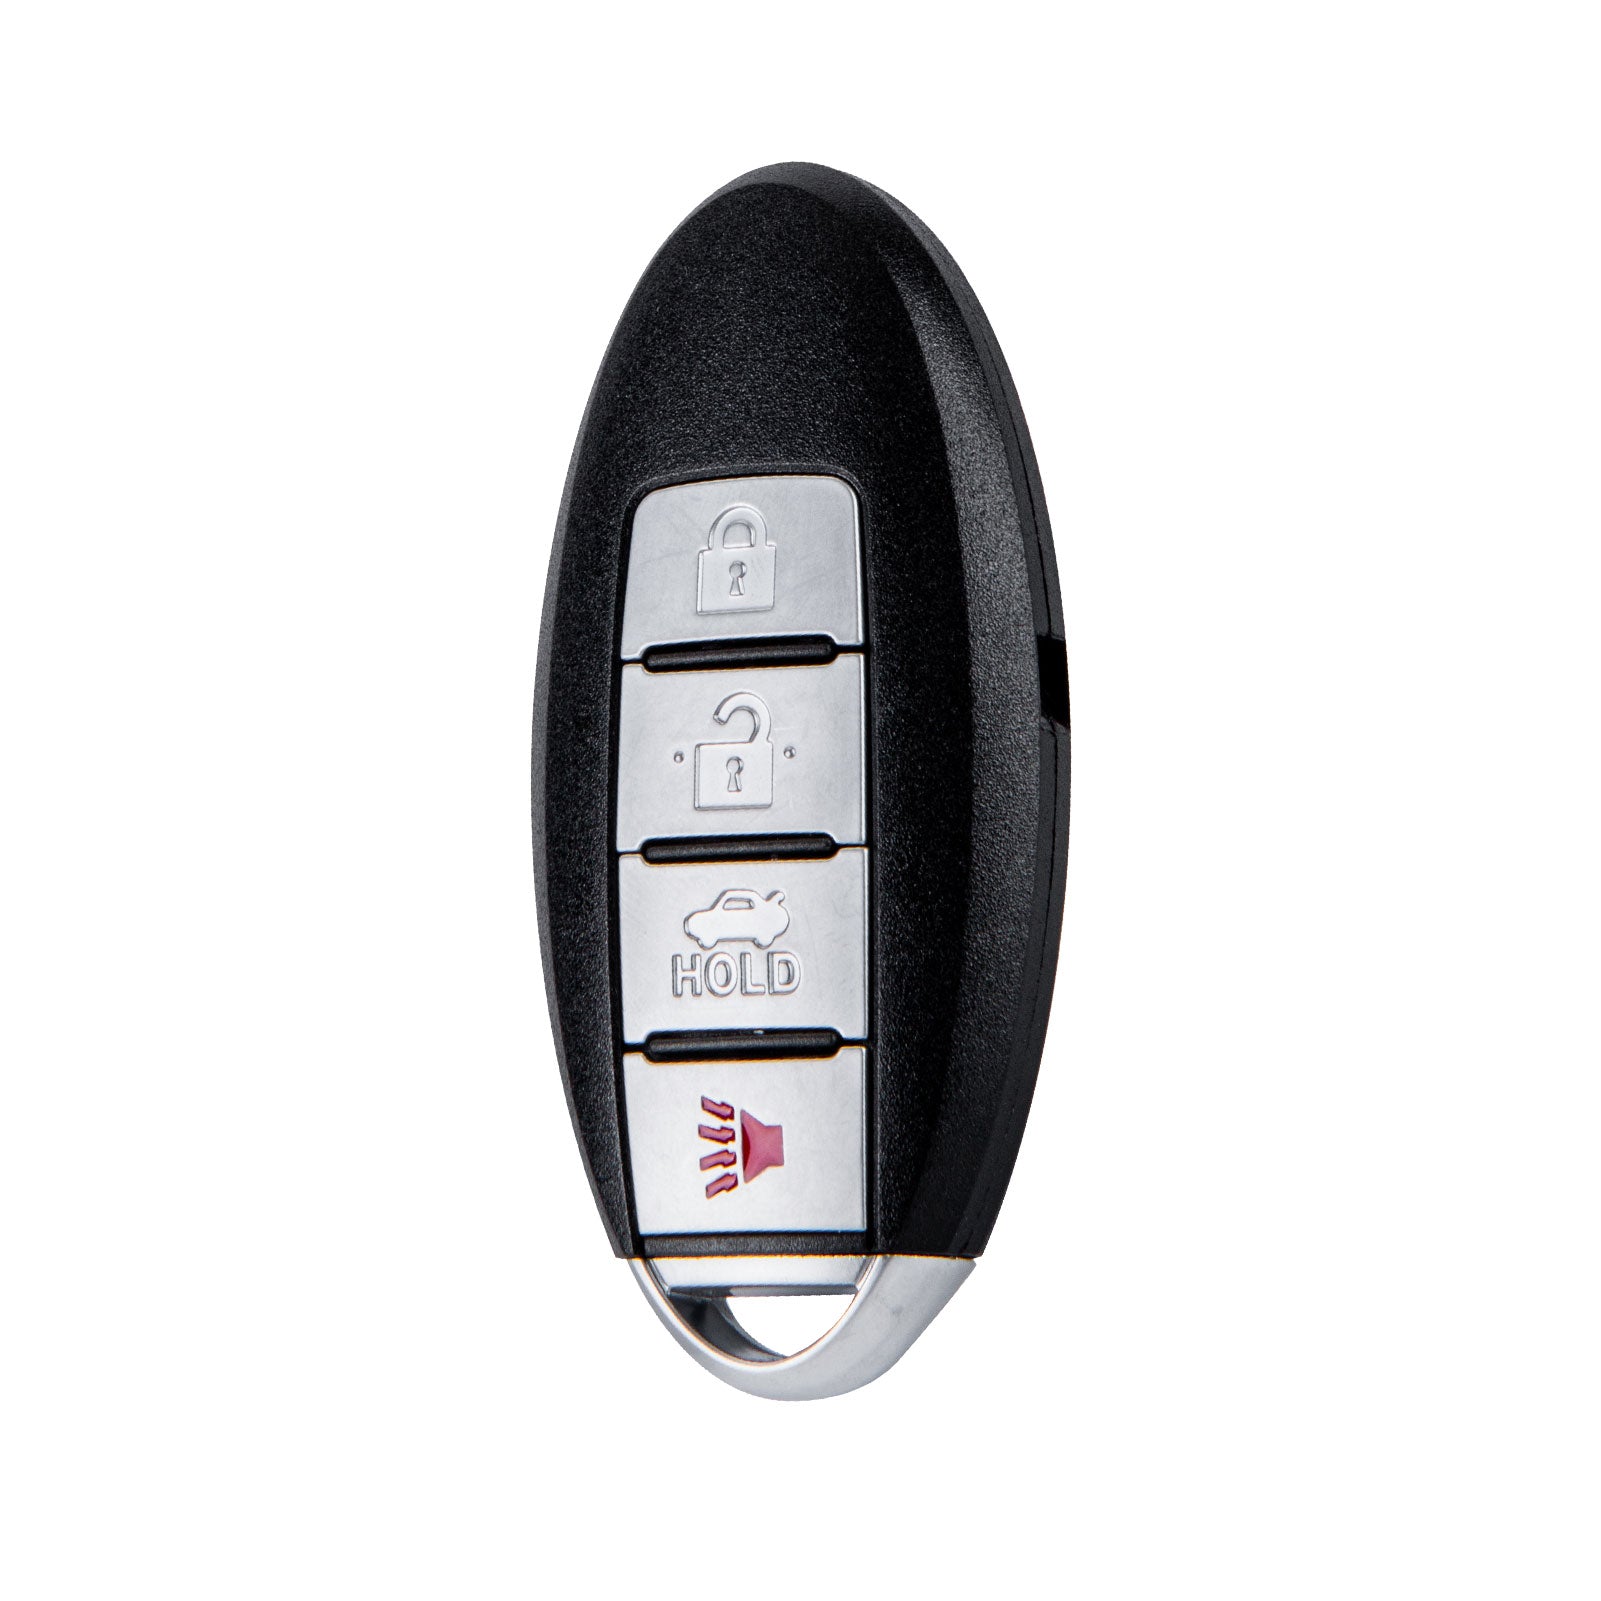 4 BTN Uncut Keyless Entry Smart Car Remote Replacement for Nissan KR55WK48903  KR-N4RB